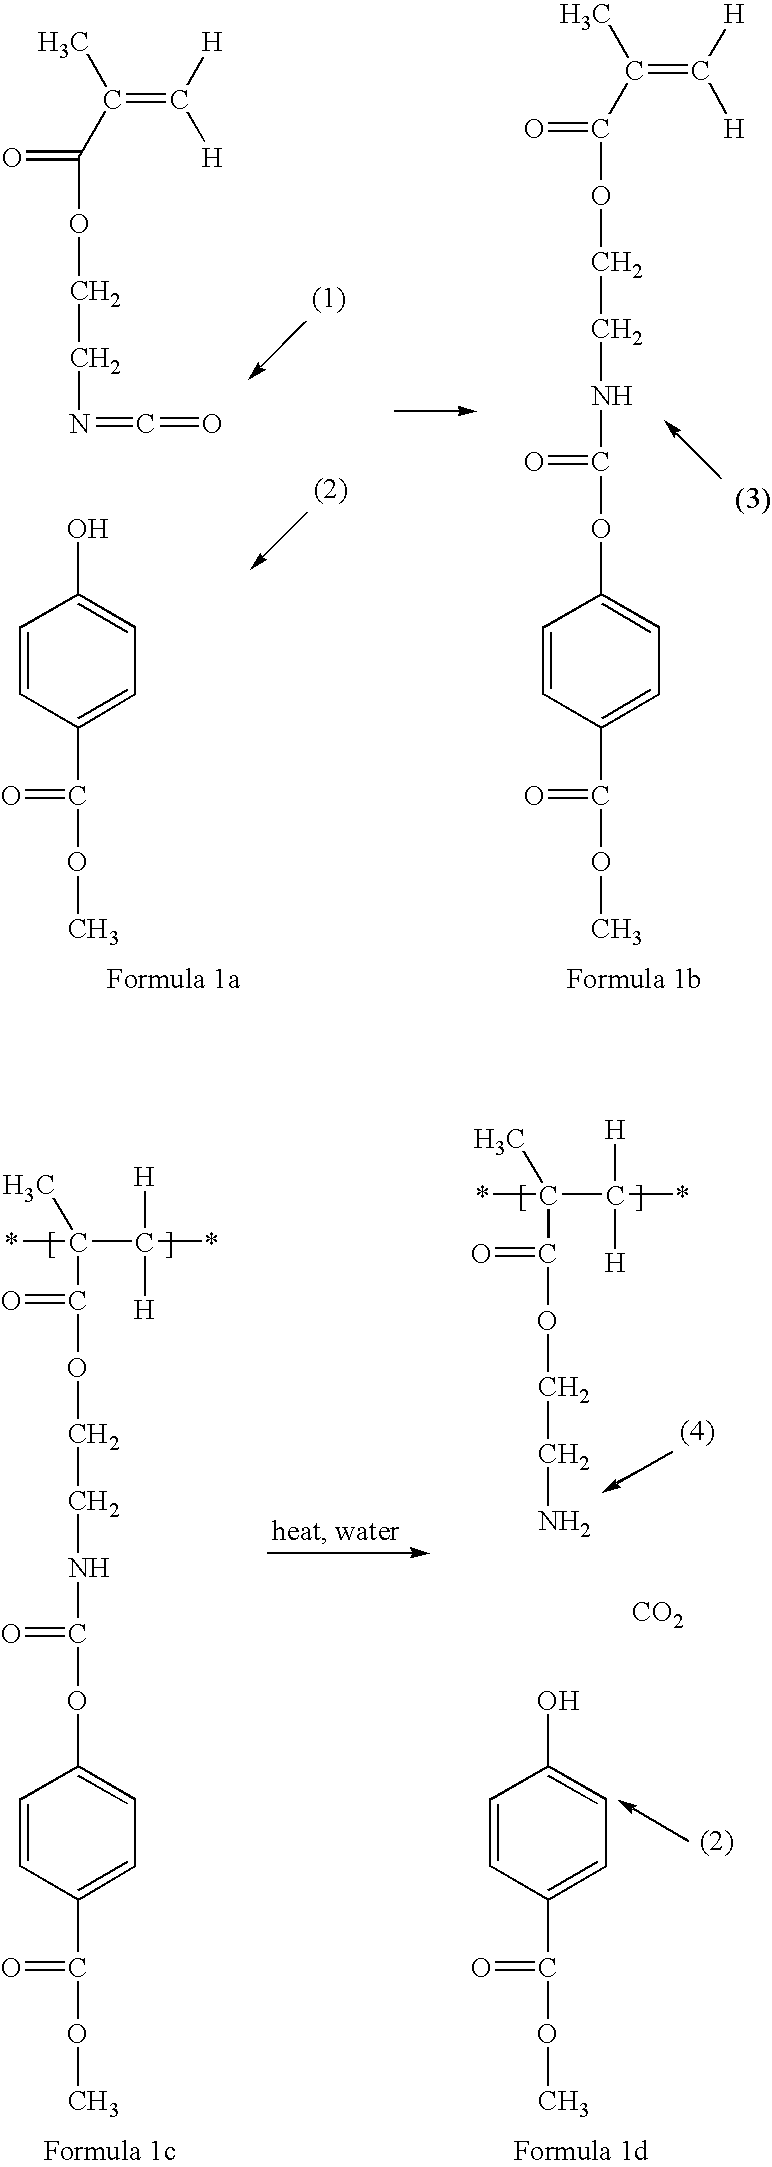 Latex particles having incorporated image stabilizers